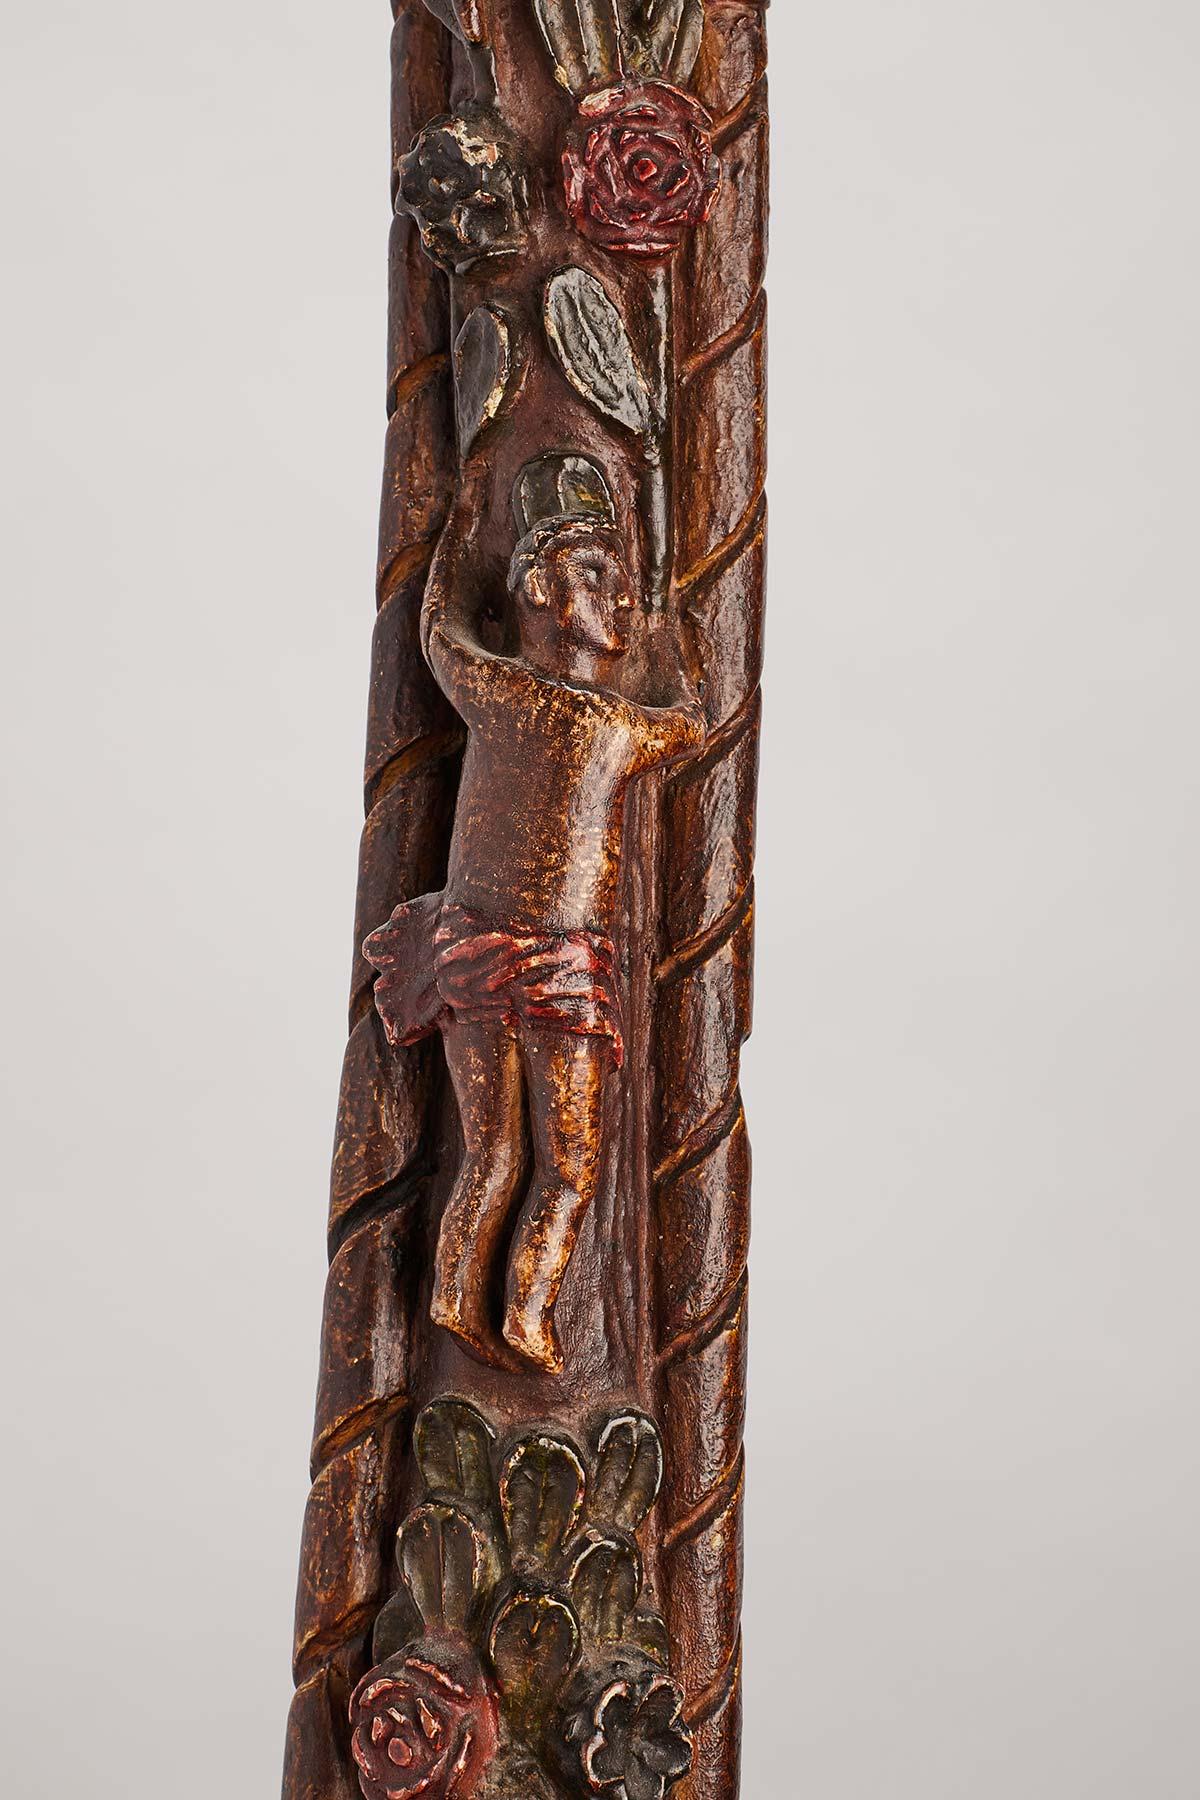 Russian Folk art walking stick depicting flowers and characters, Russia circa 1830. For Sale